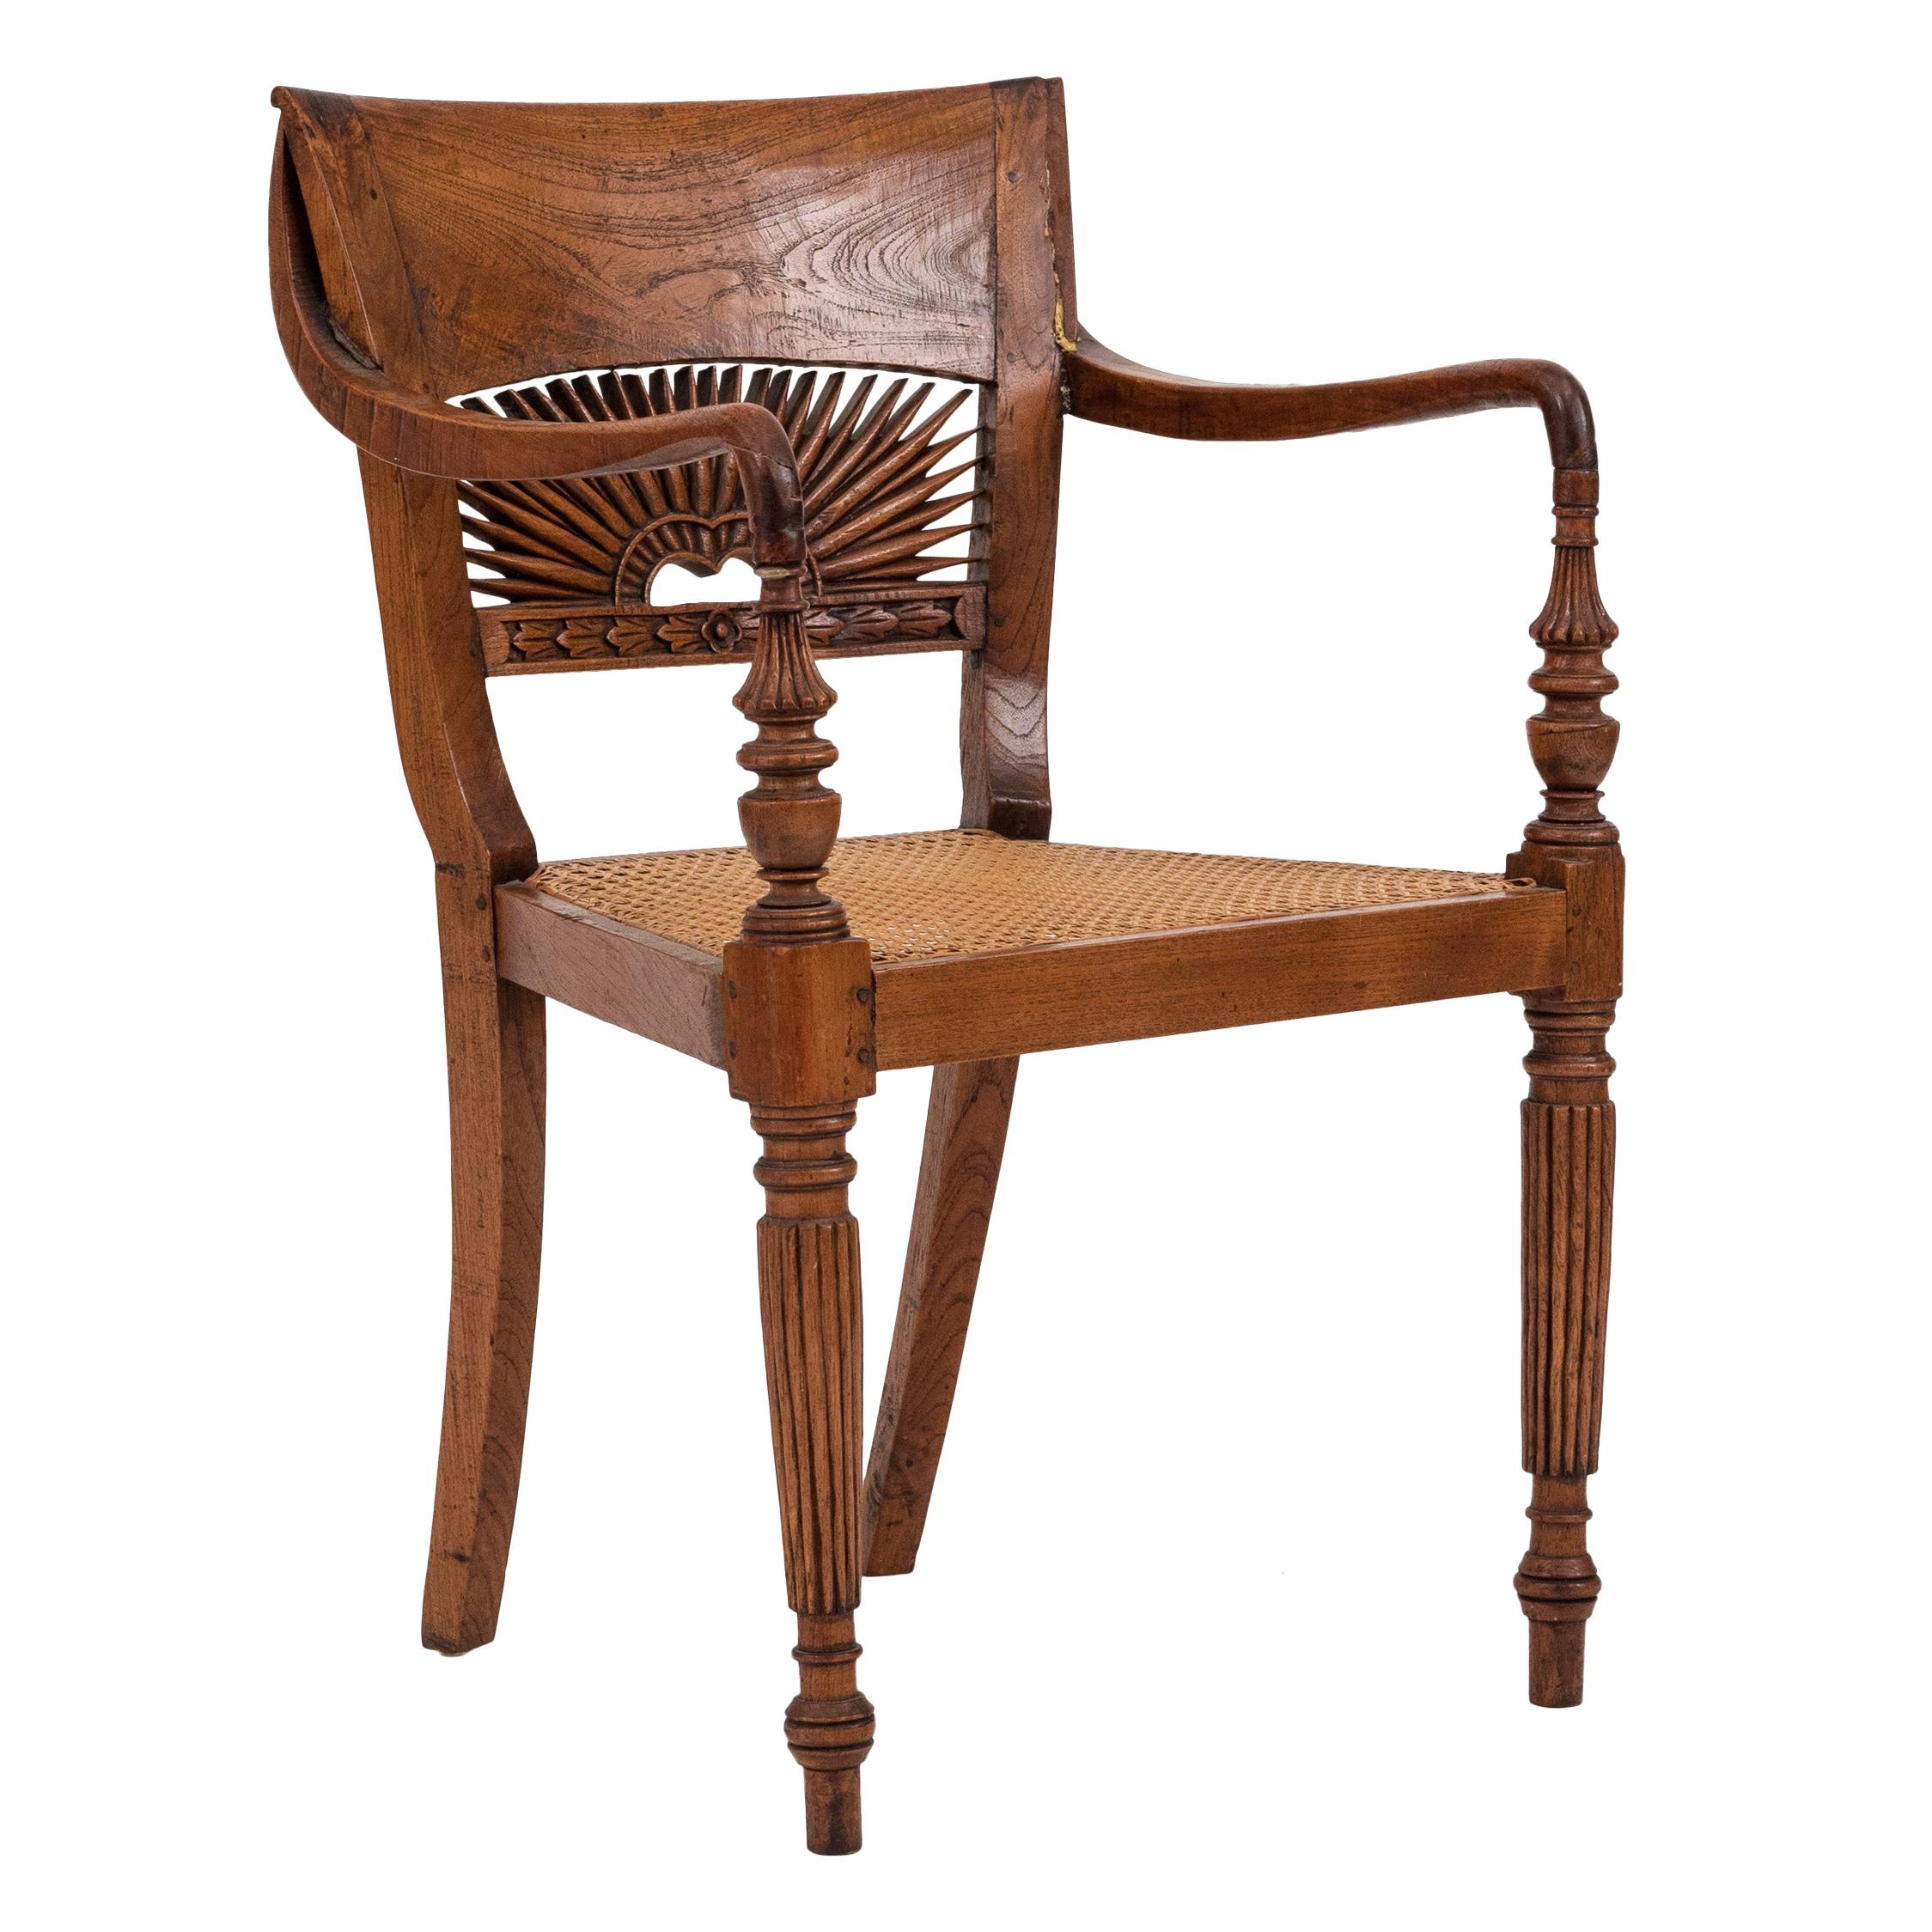 English Anglo-Indian Teak Arm Chair